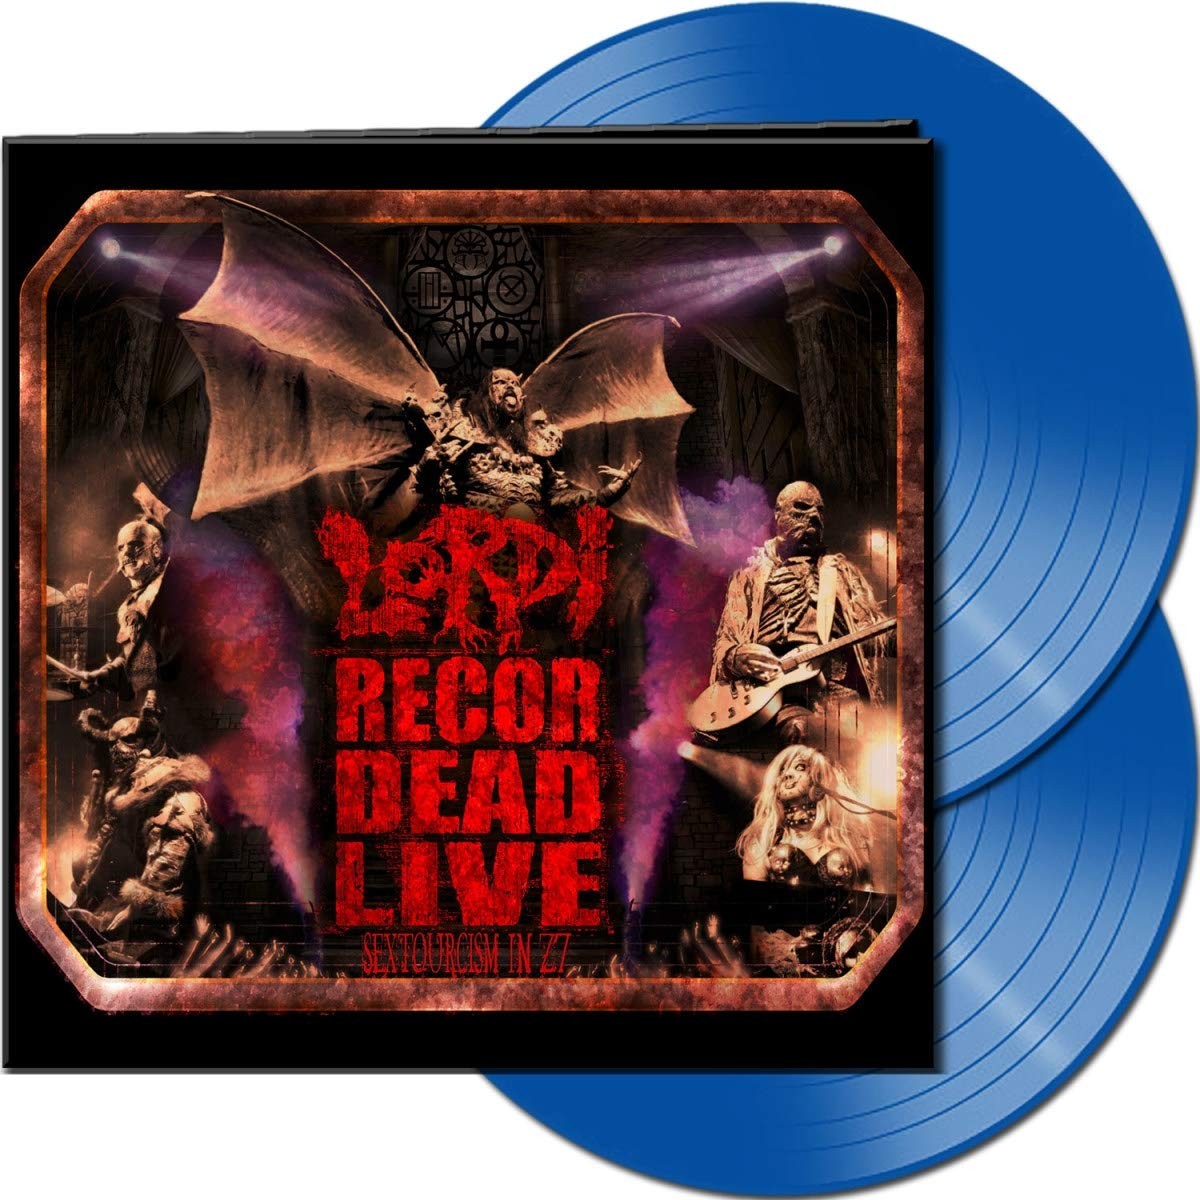 Lordi - Recordead Live-Sextourcism In Z7